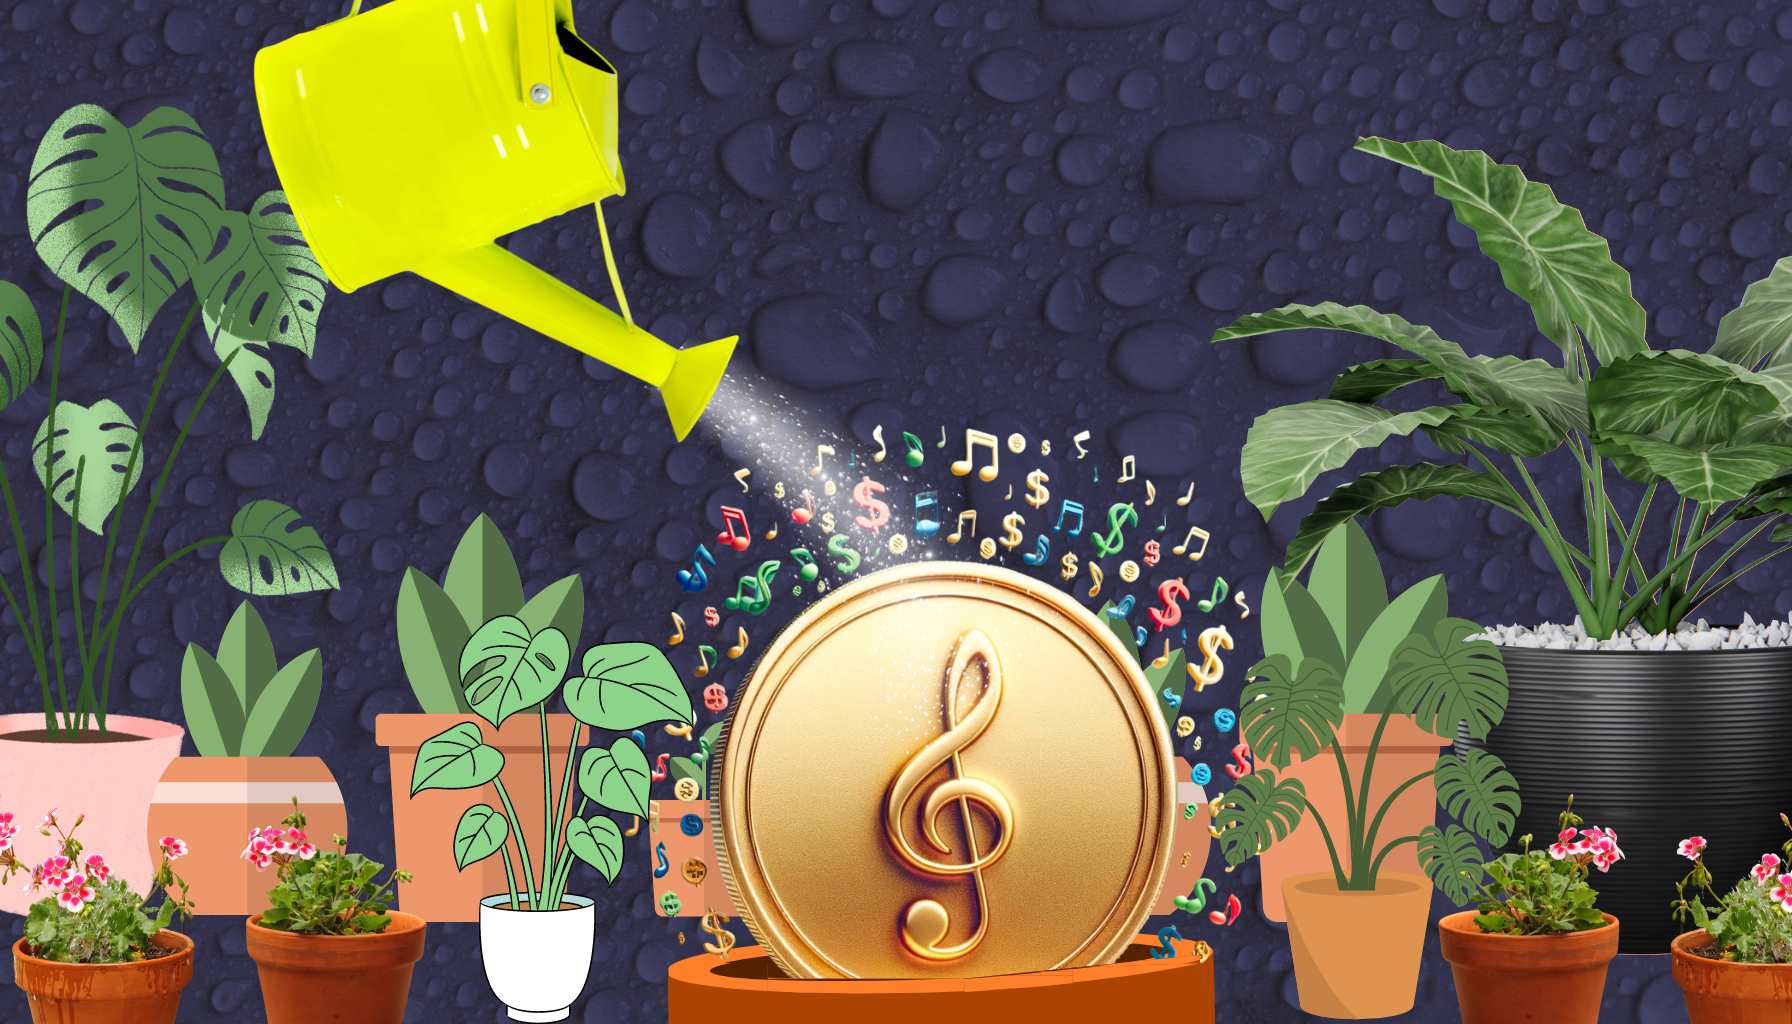 streams of water falling on potted plants and a centerpiece of a plant of music notes and money growing on its own